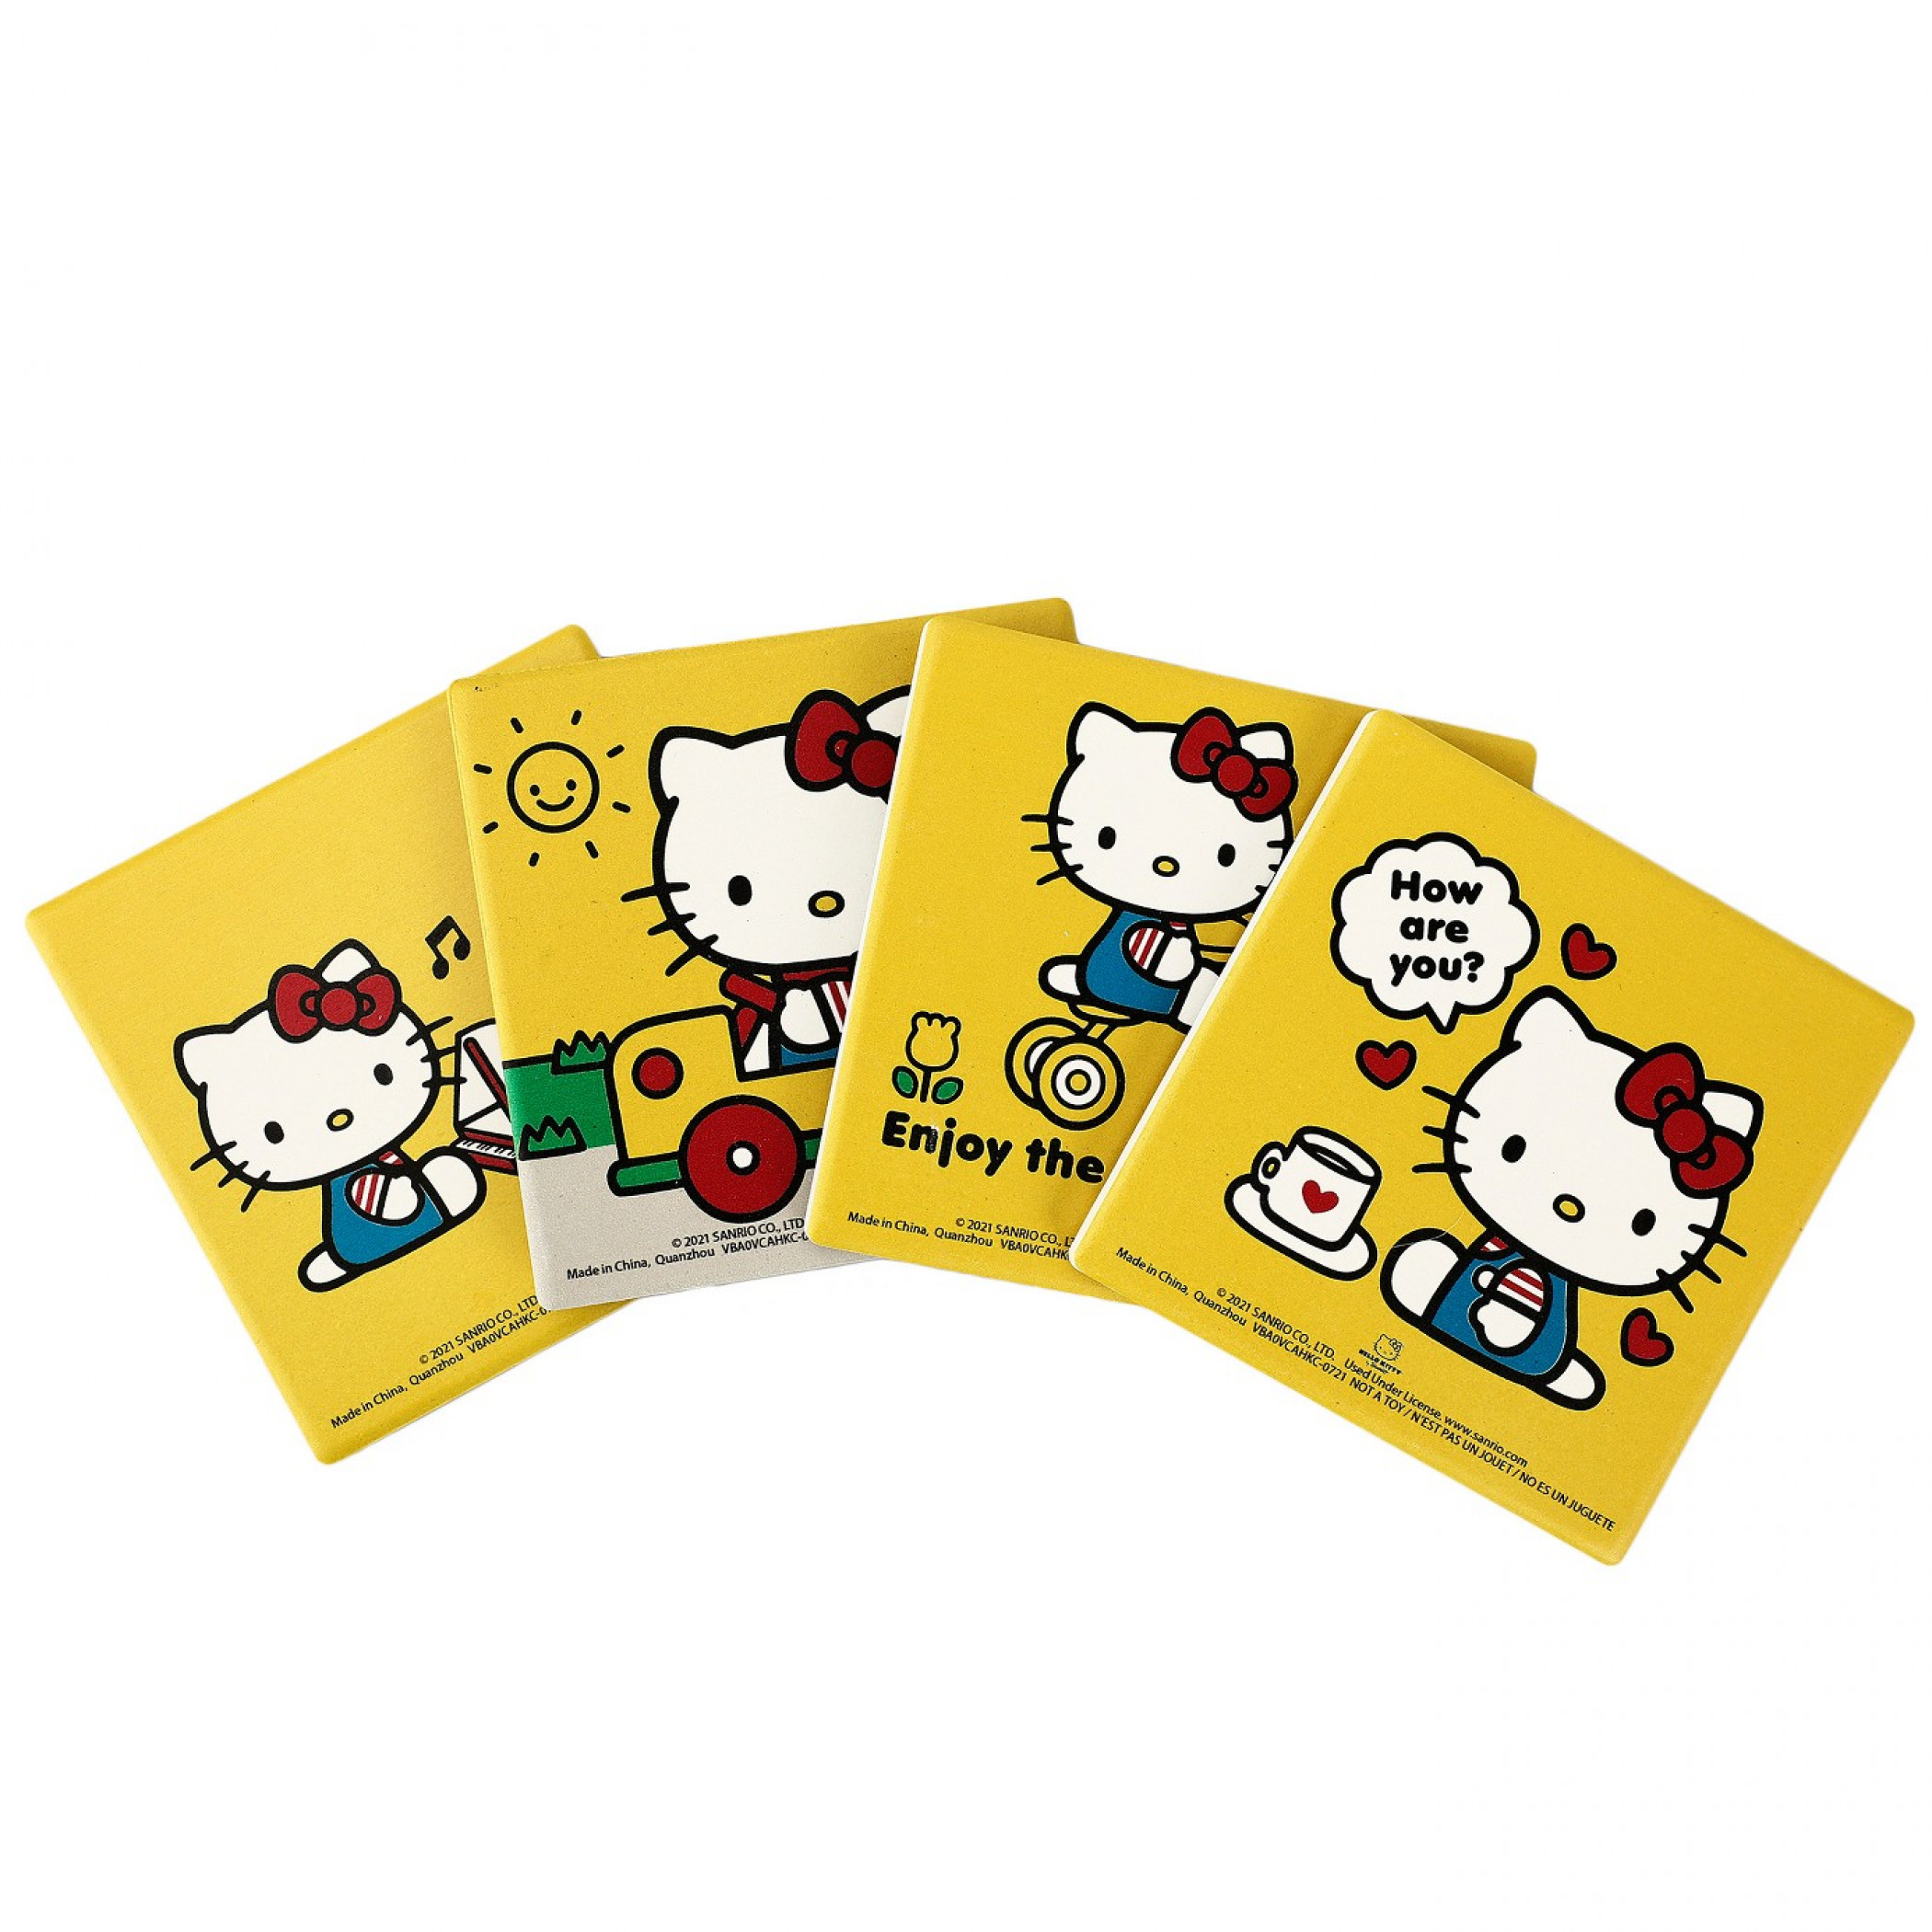 Hello Kitty Enjoy The Little Things Variety Ceramic Coaster Set 4-Pack